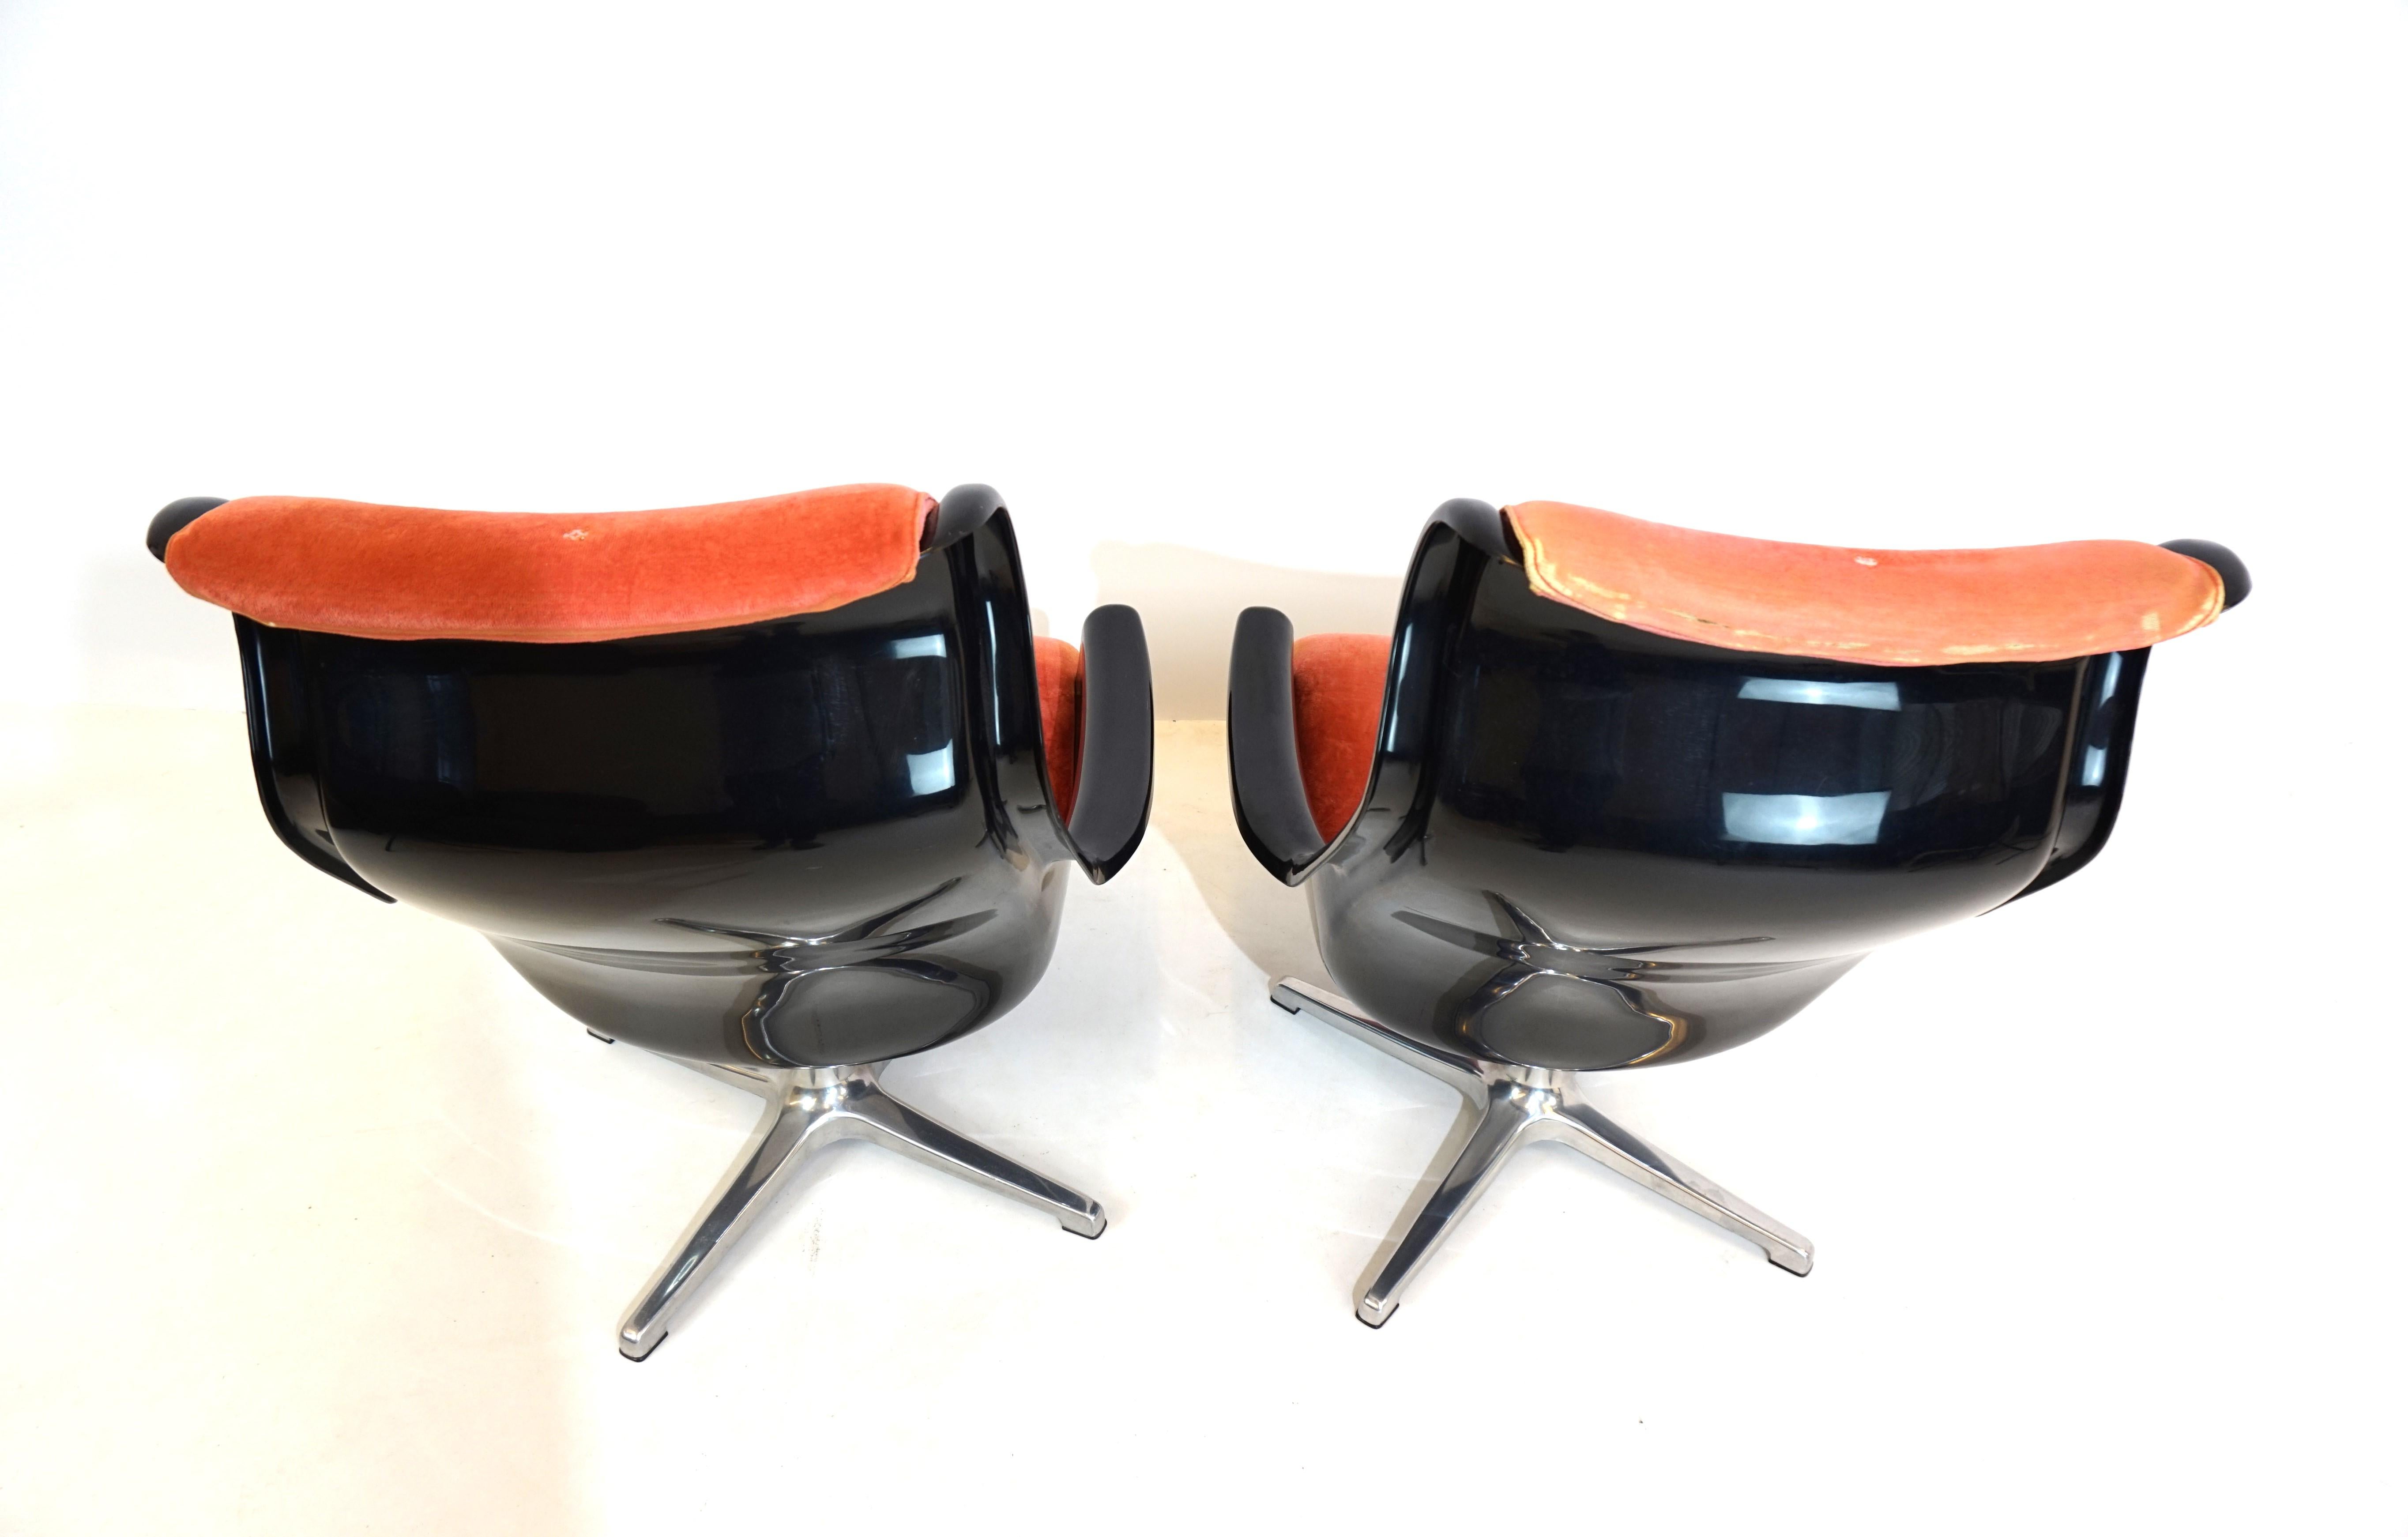 Dux Galaxy set of 2 Space Age armchairs by Alf Svensson & Yngvar Sandström For Sale 7